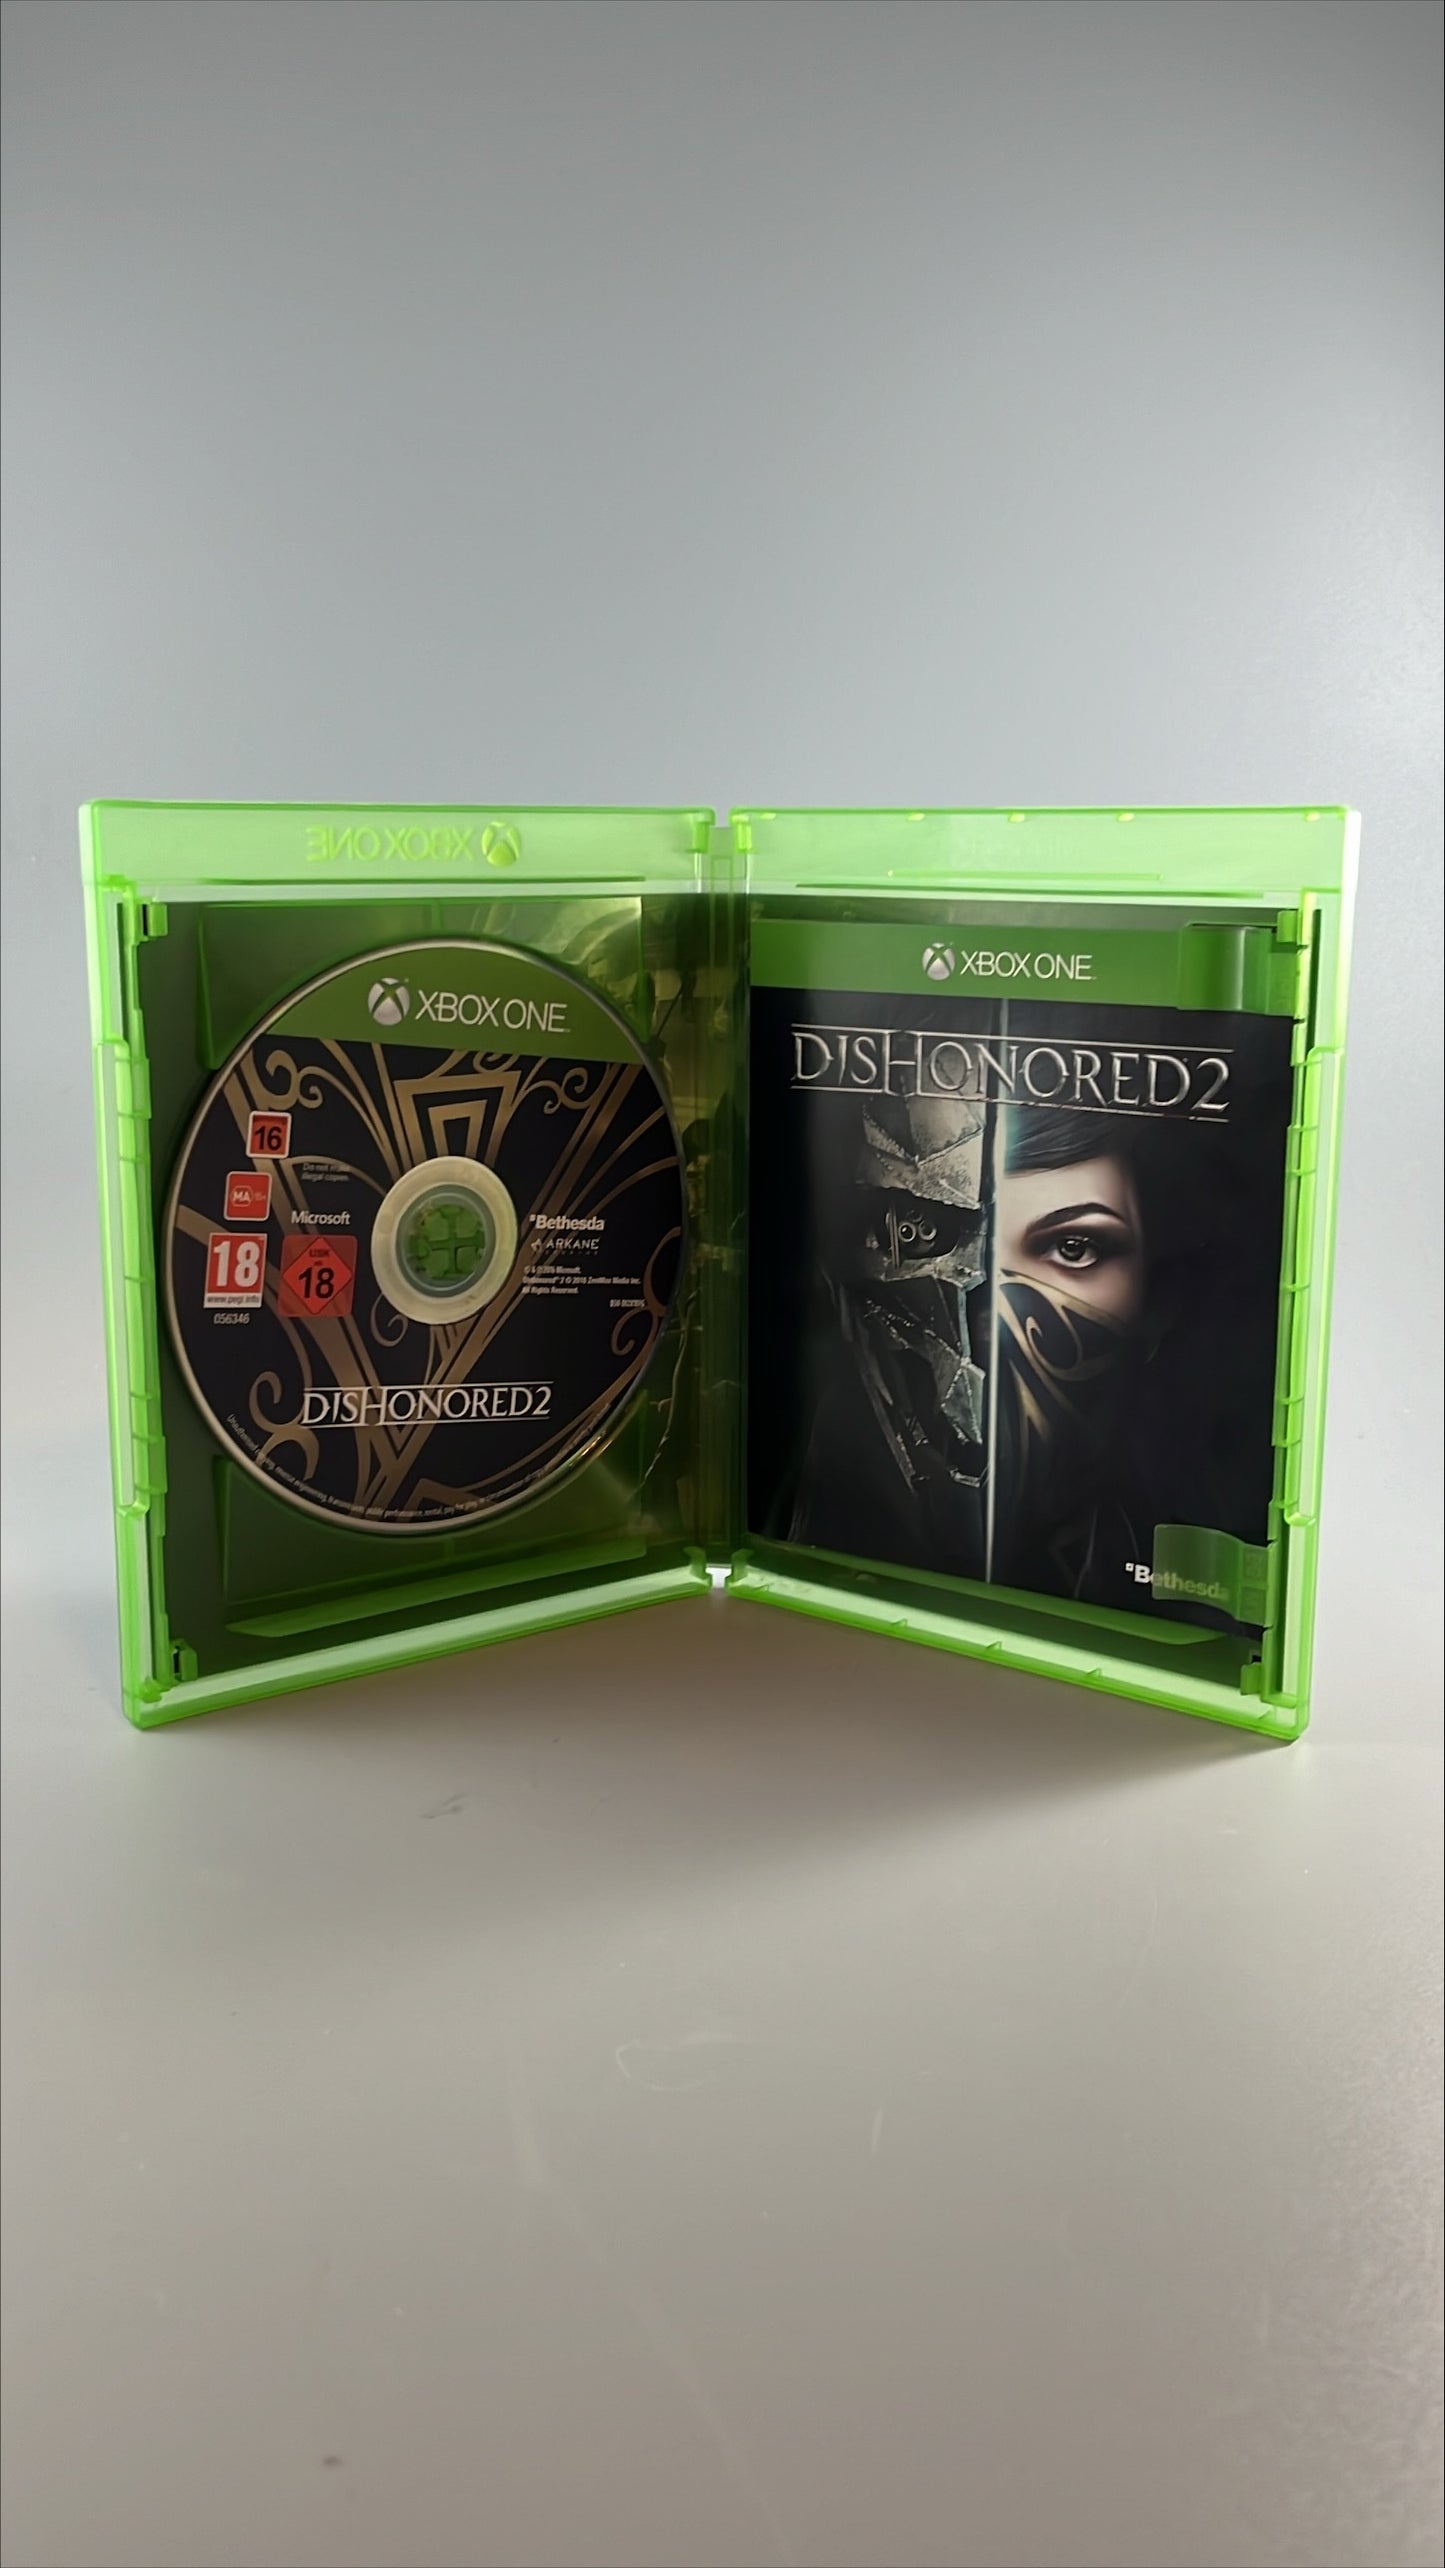 Dishonored 2 (PAL version)